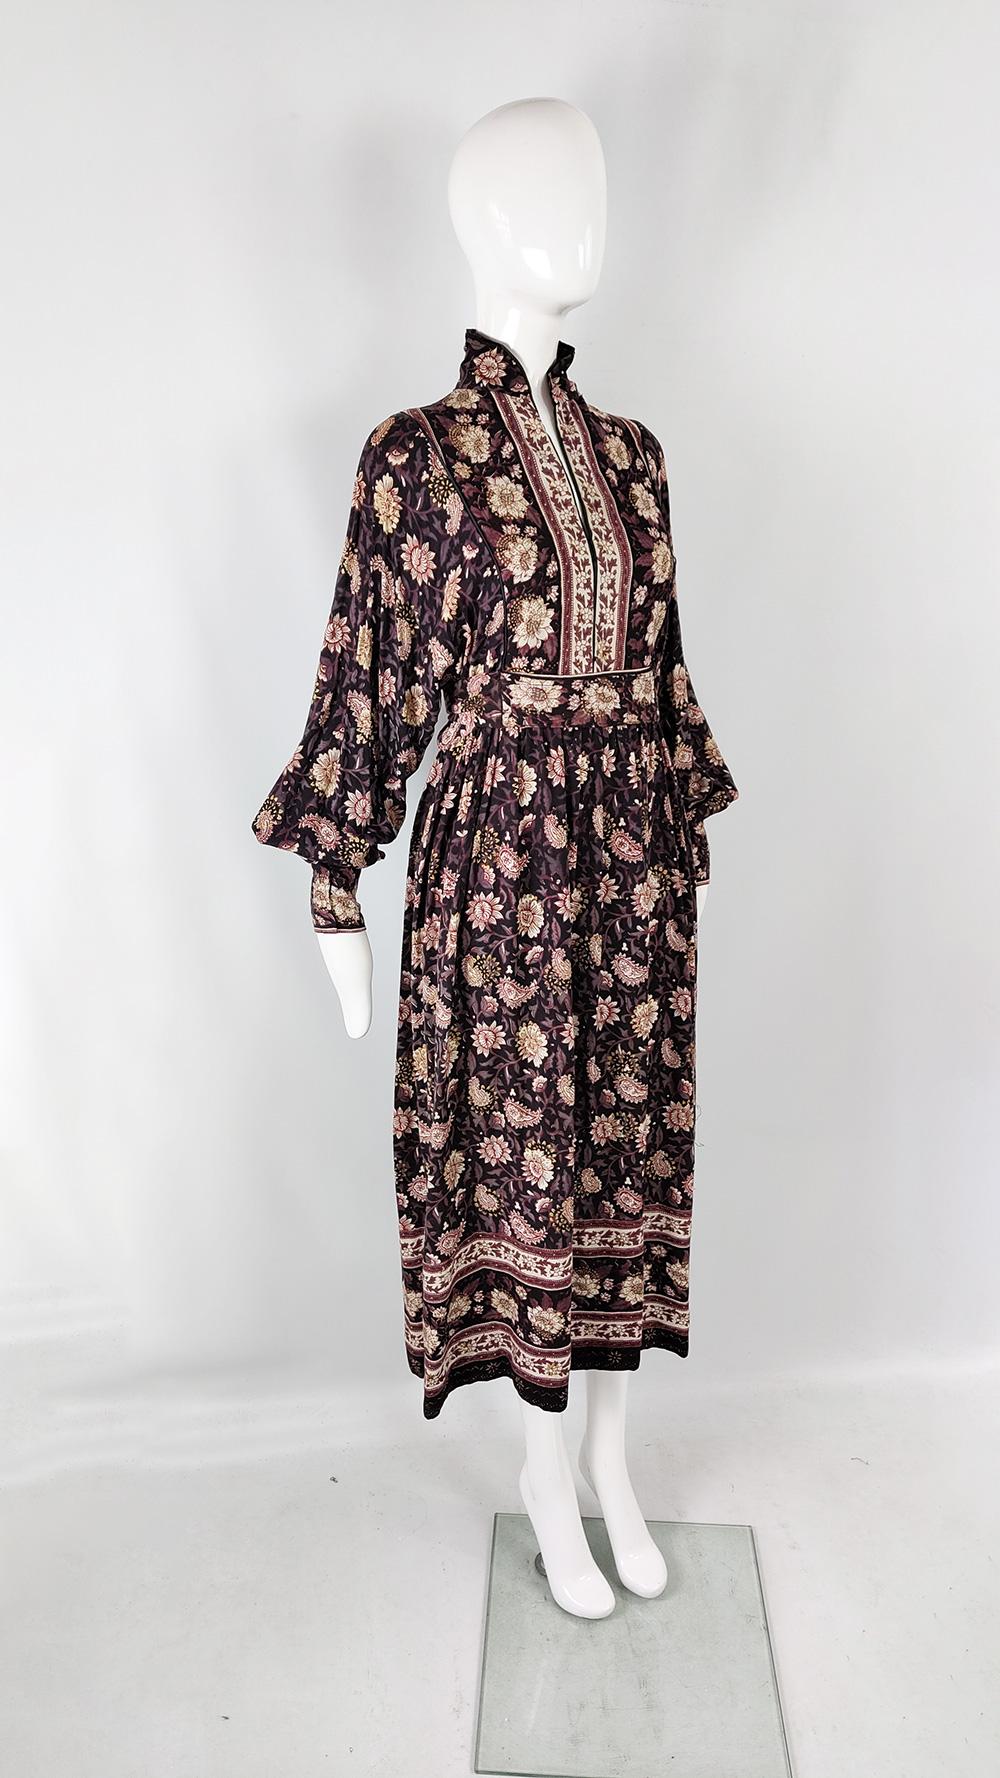 Ayesha Davar Vintage 70s Indian Block Print Bohemian Dress, 1970s  In Good Condition For Sale In Doncaster, South Yorkshire